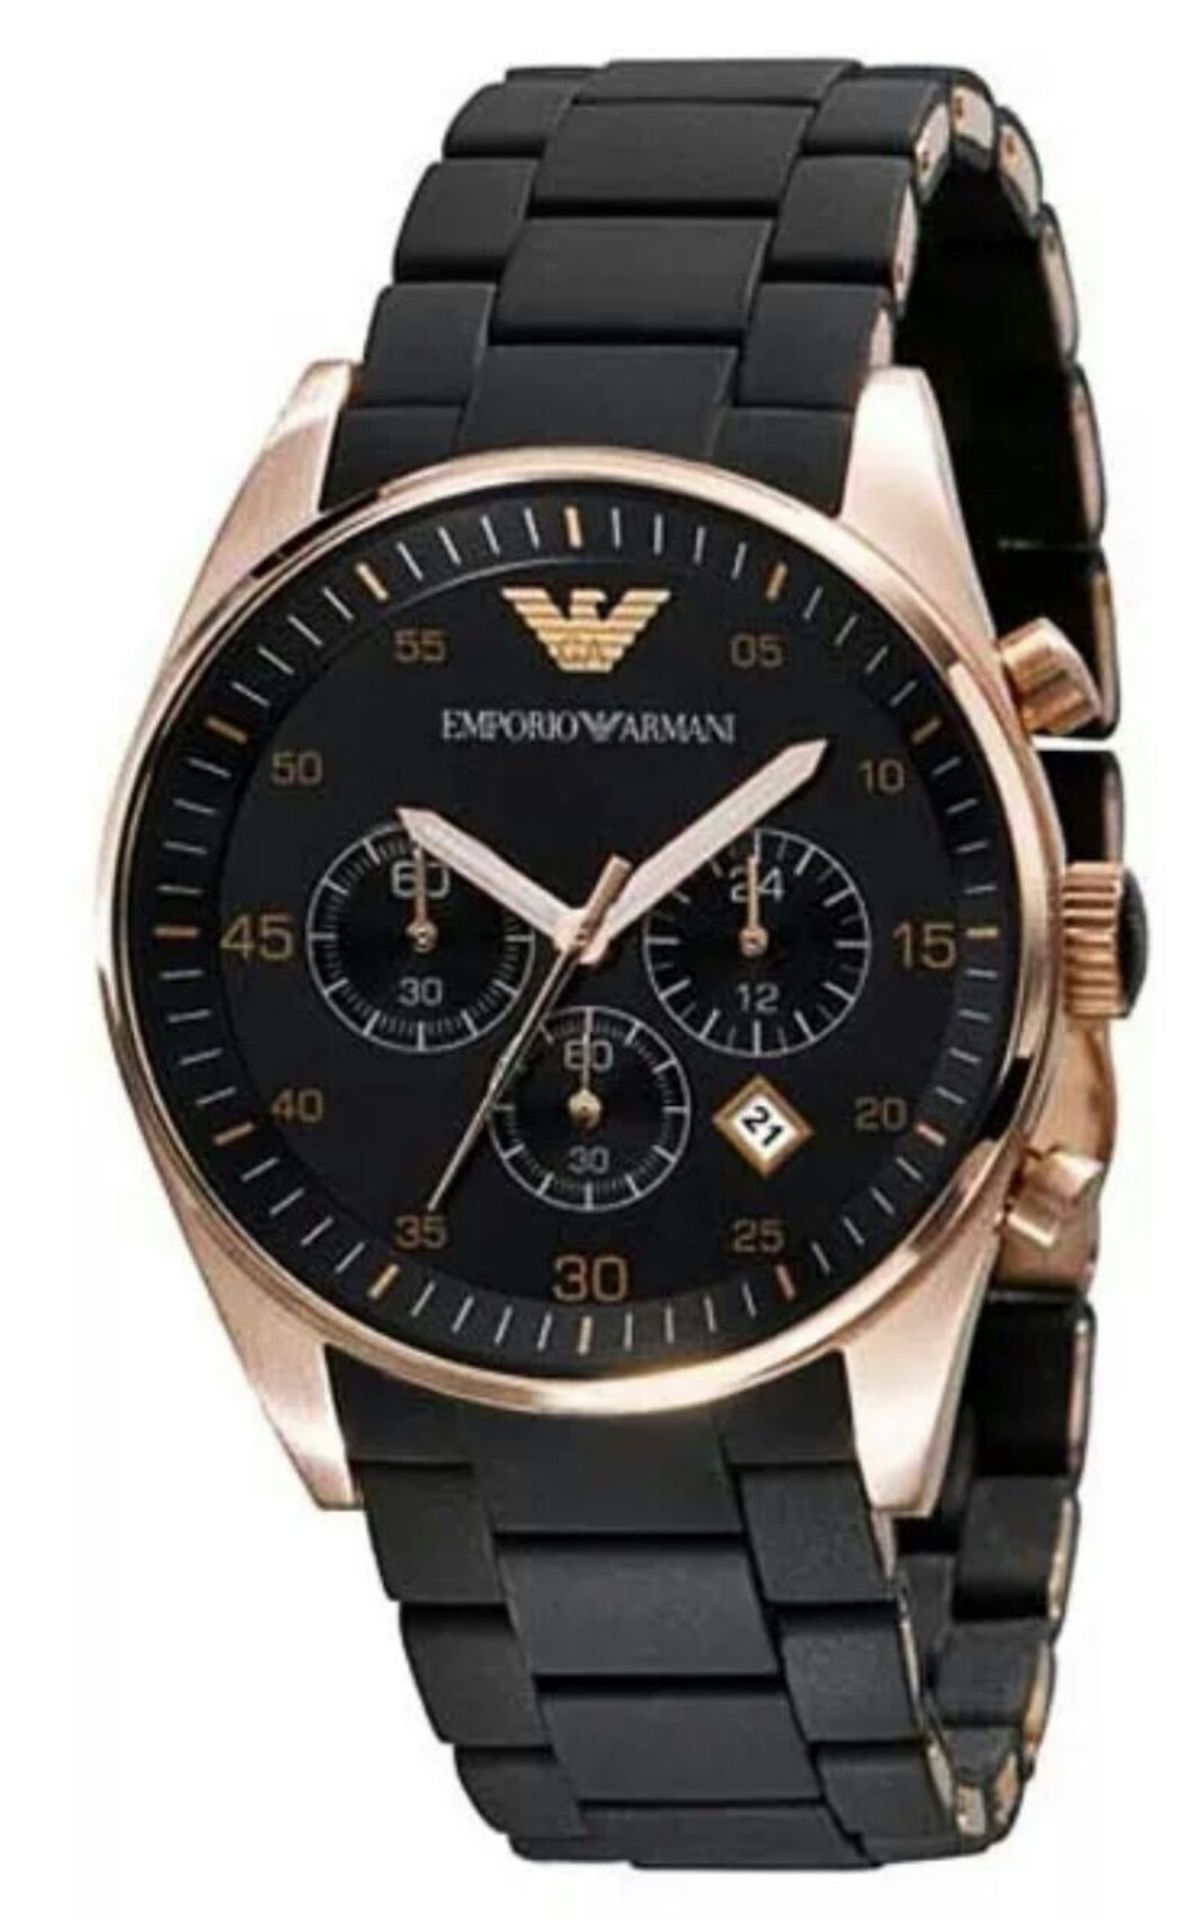 BRAND NEW GENTS EMPORIO ARMANI AR5905, SPORTIVO WATCH WITH ARMANI WATCH BOXES, MANUAL CERTIFICATE,